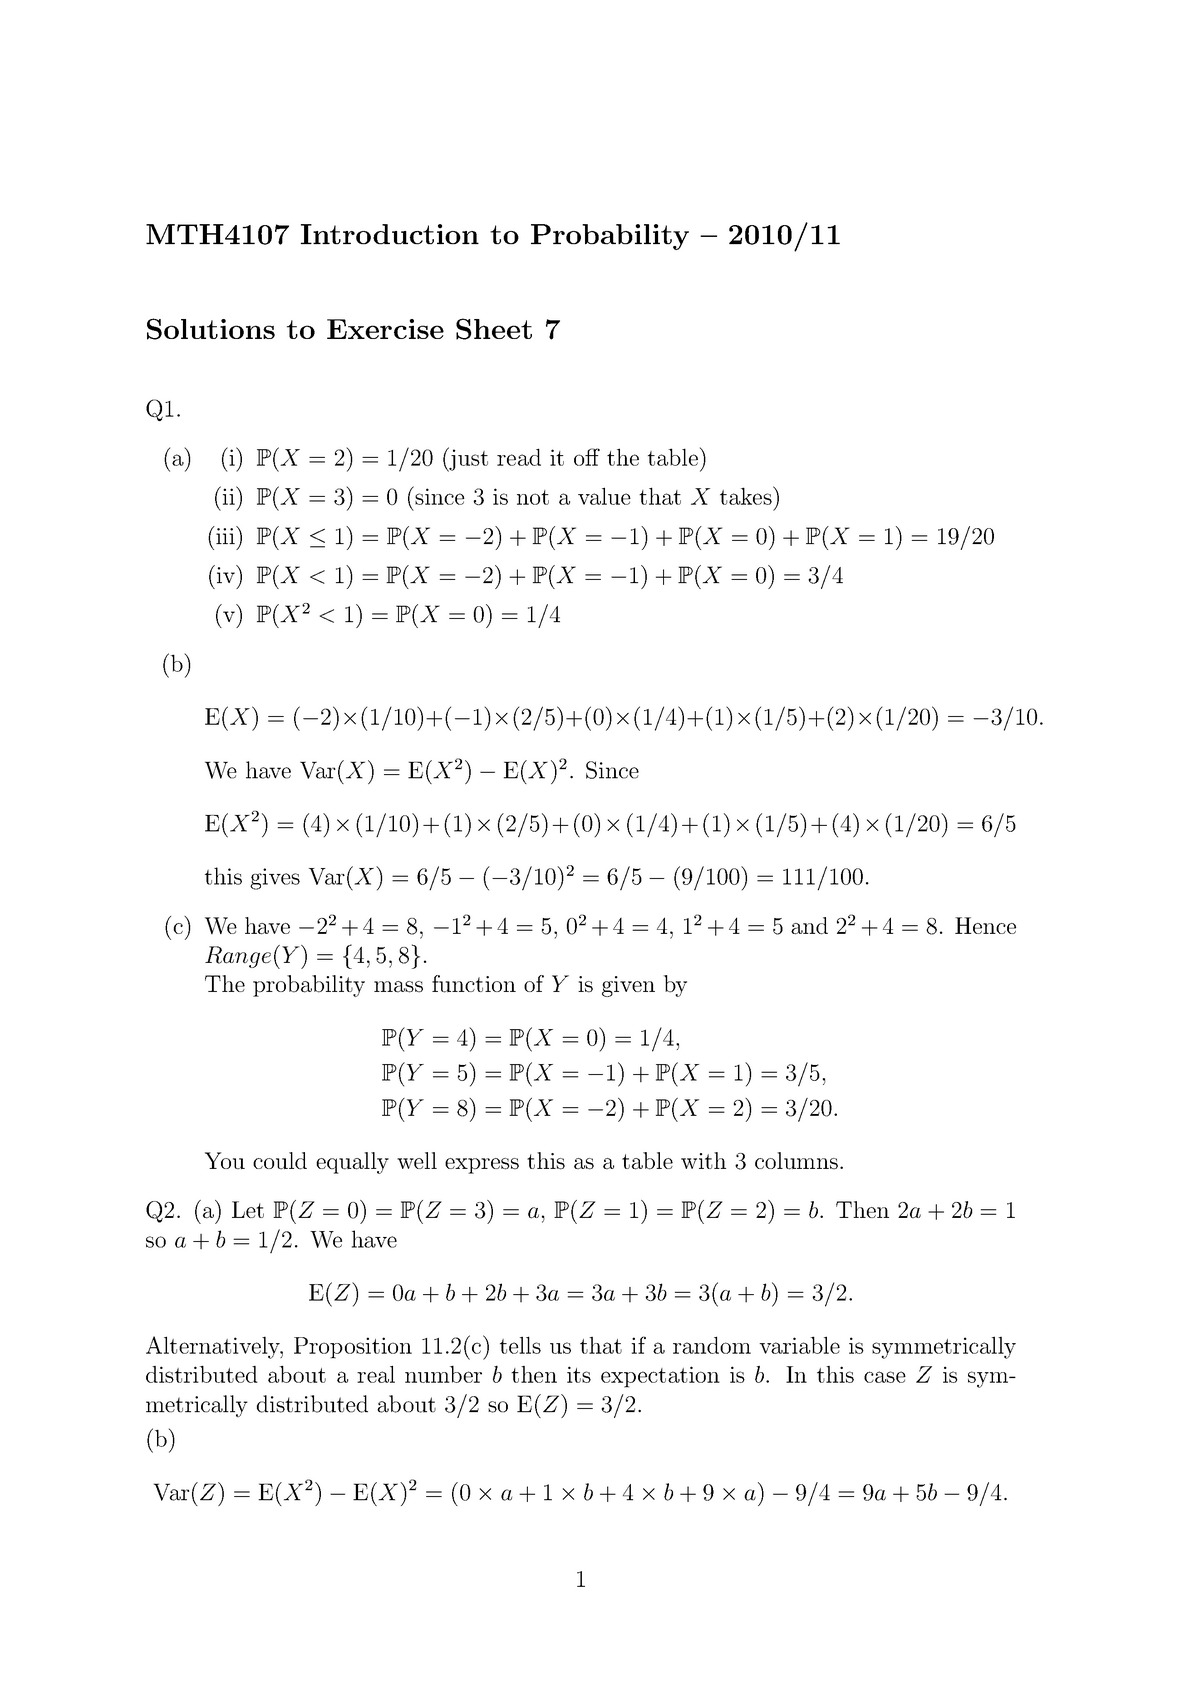 Exercise Sheet 7 Solutions Mth4107 Introduction To Probability 10 11 Solutions To Exercise Sheet Q1 Just Read It Off The Table Ii Since Is Not Value That Studocu